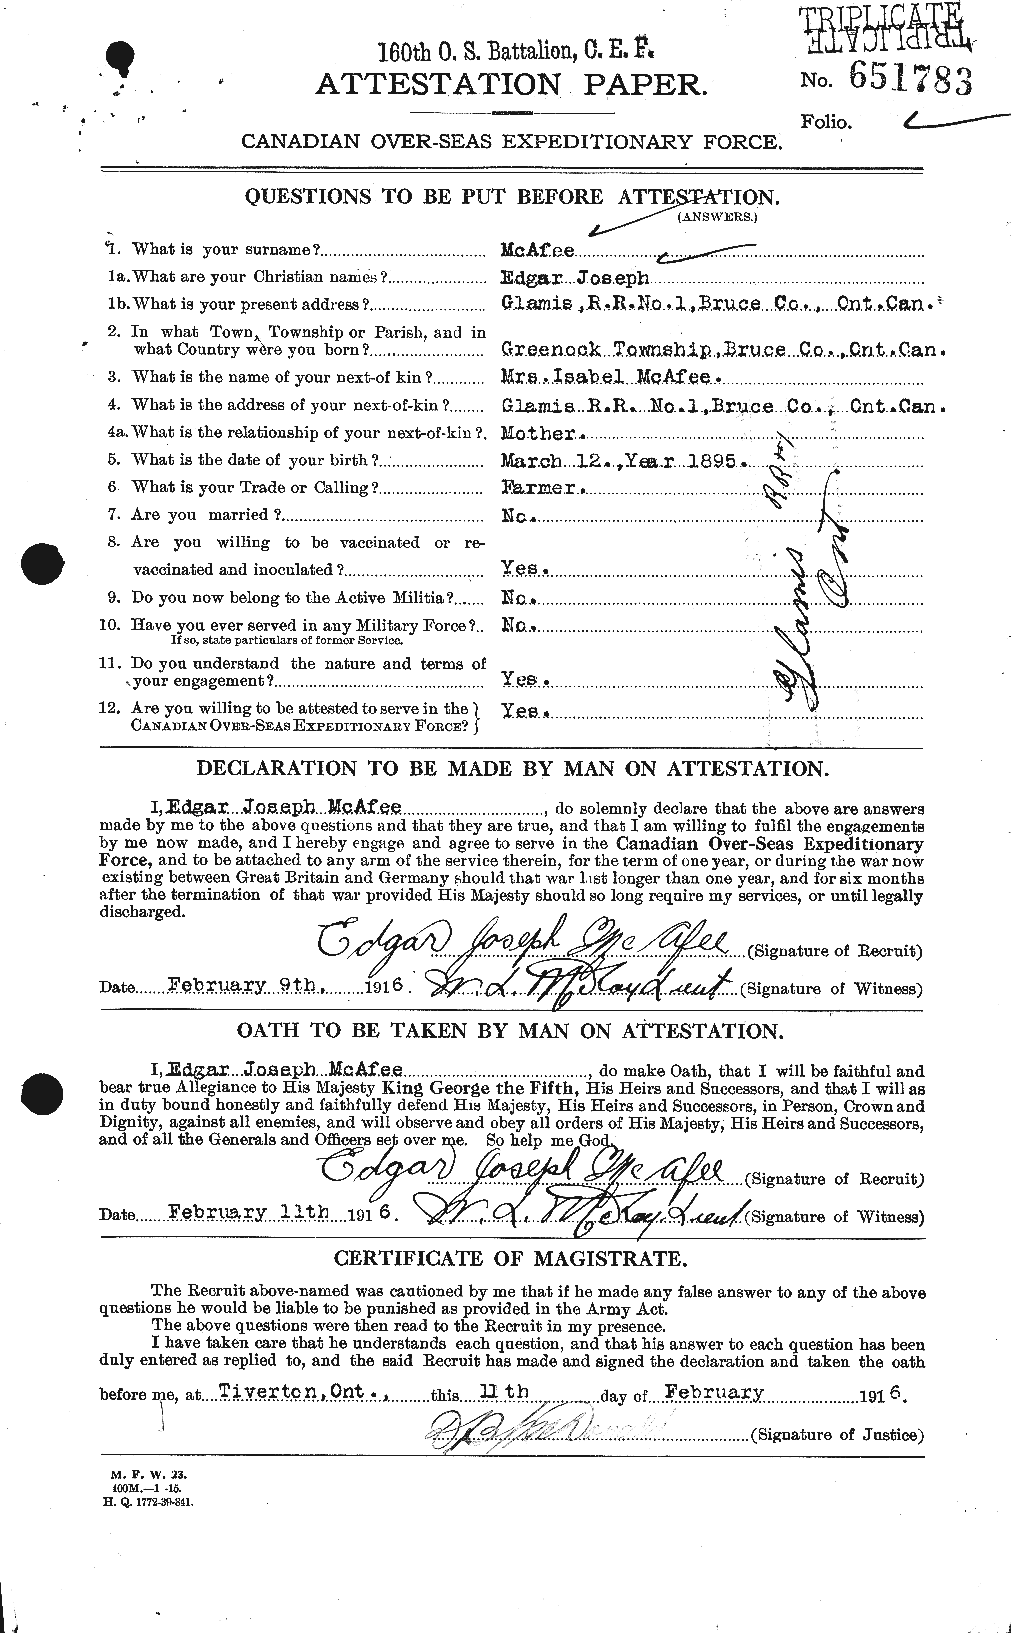 Personnel Records of the First World War - CEF 130198a